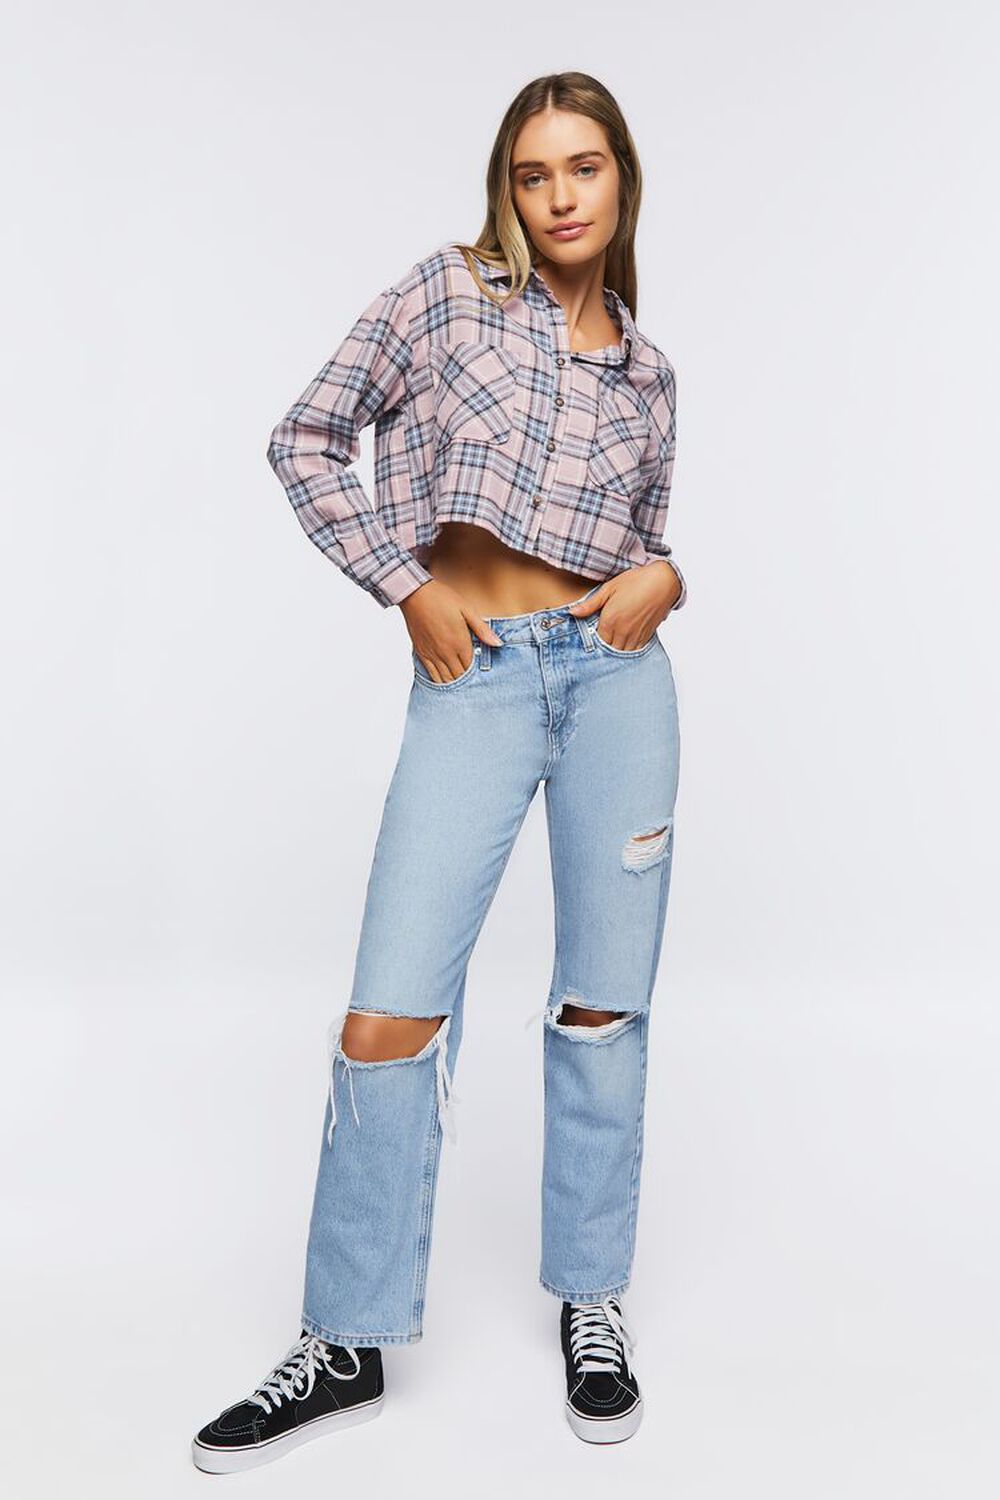 Compare prices for Cropped Flannel Embellished Blouson (1A5QEL) in official  stores